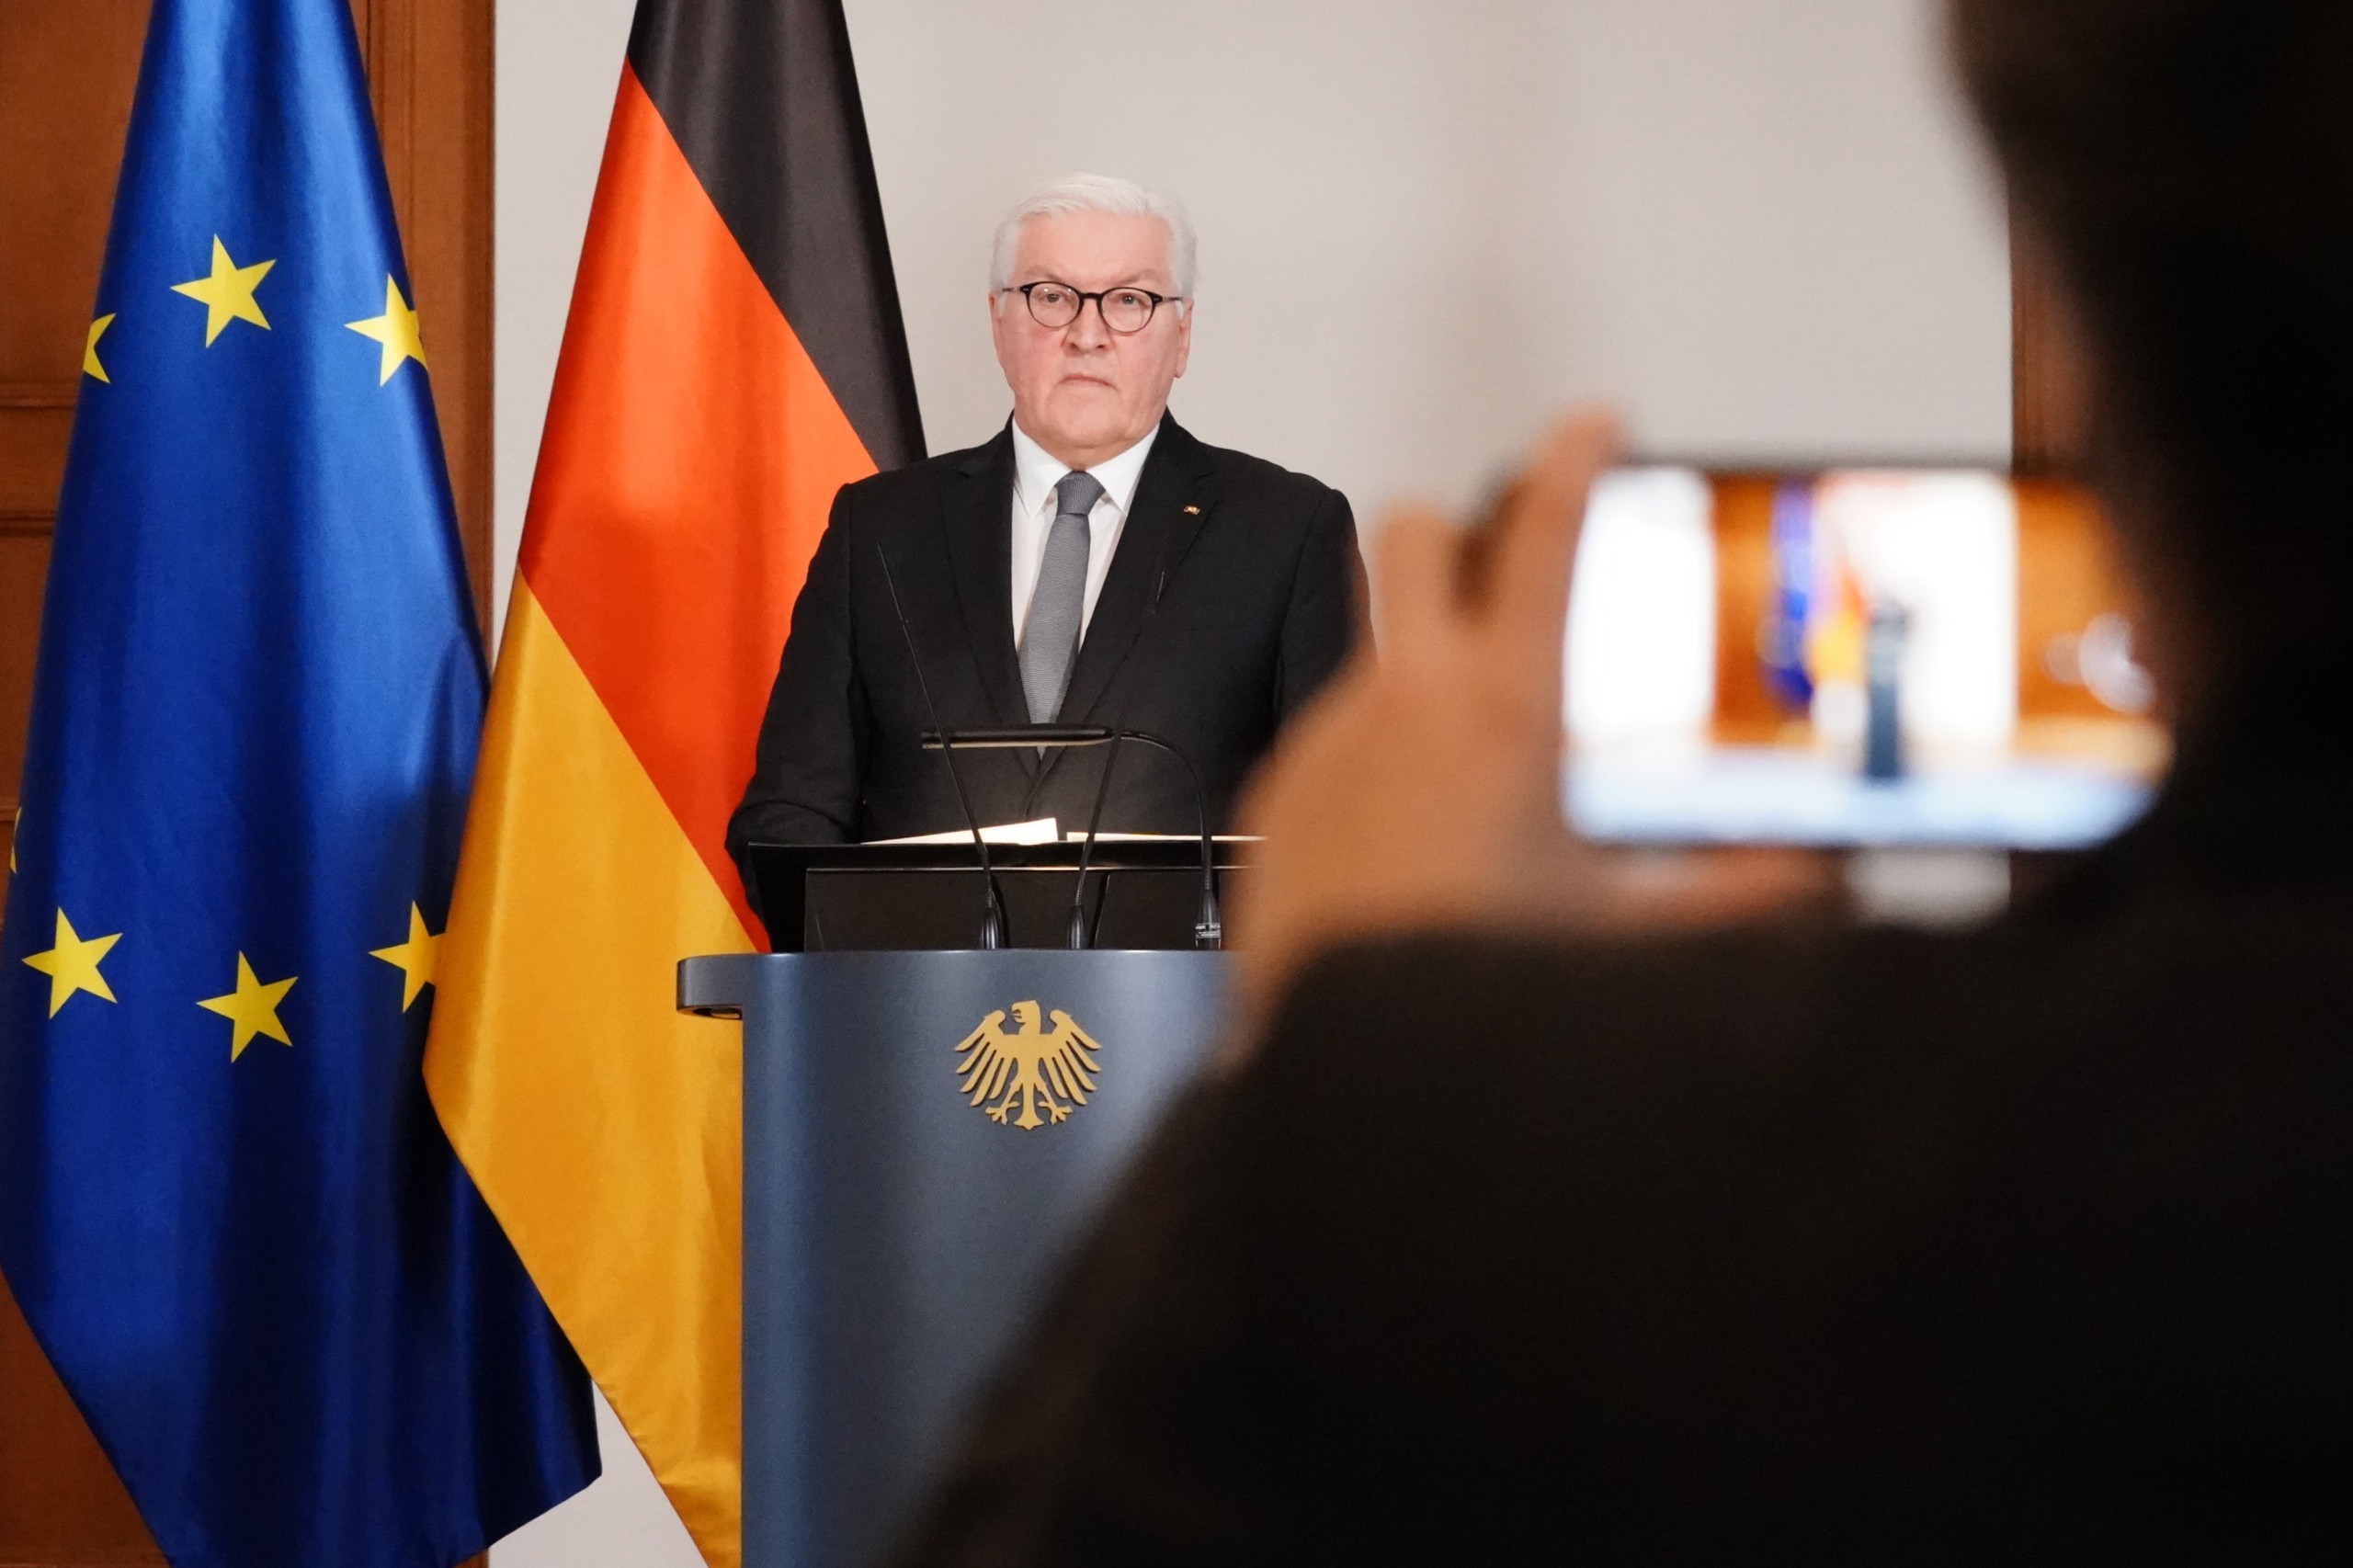 epa09783978 German President Frank-Walter Steinmeier delivers a statement at Bellevue Palace in Berlin, Germany, 25 February 2022. Russia launched a military operation against Ukraine on the early hours of 24 February.  EPA/CLEMENS BILAN